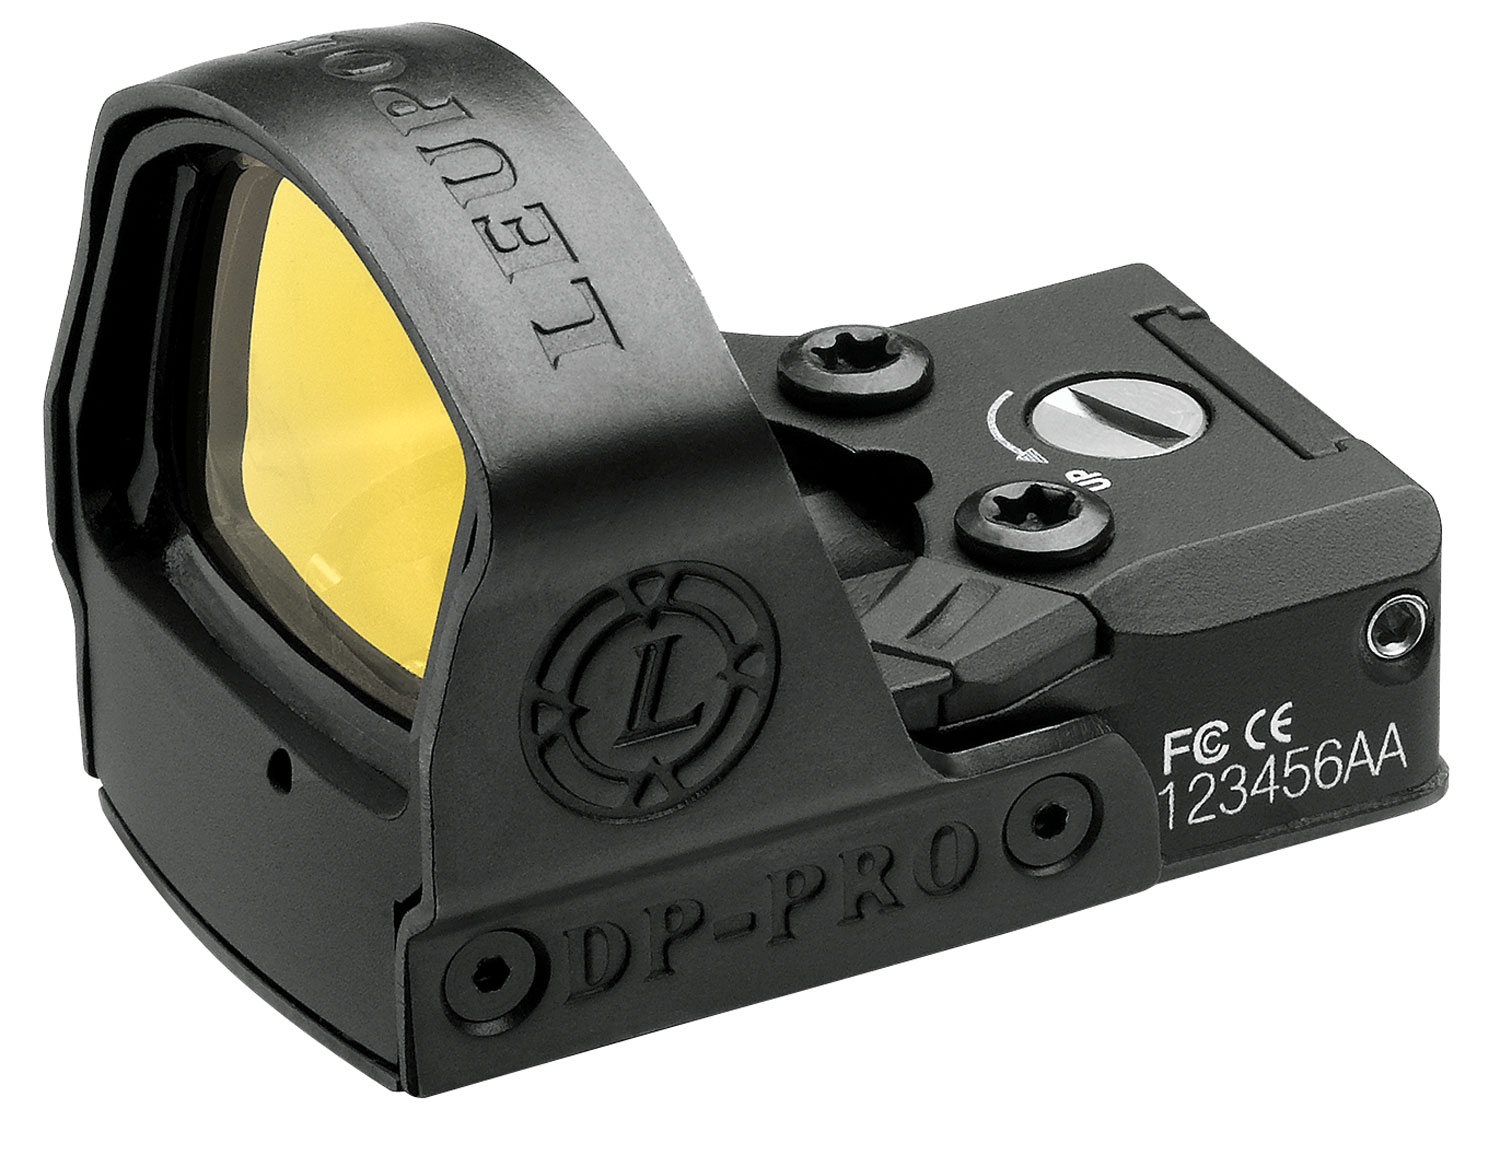 Leupold 119688 DeltaPoint Pro  Matte Black 1x 2.5  MOA Illuminated Red Dot Reticle